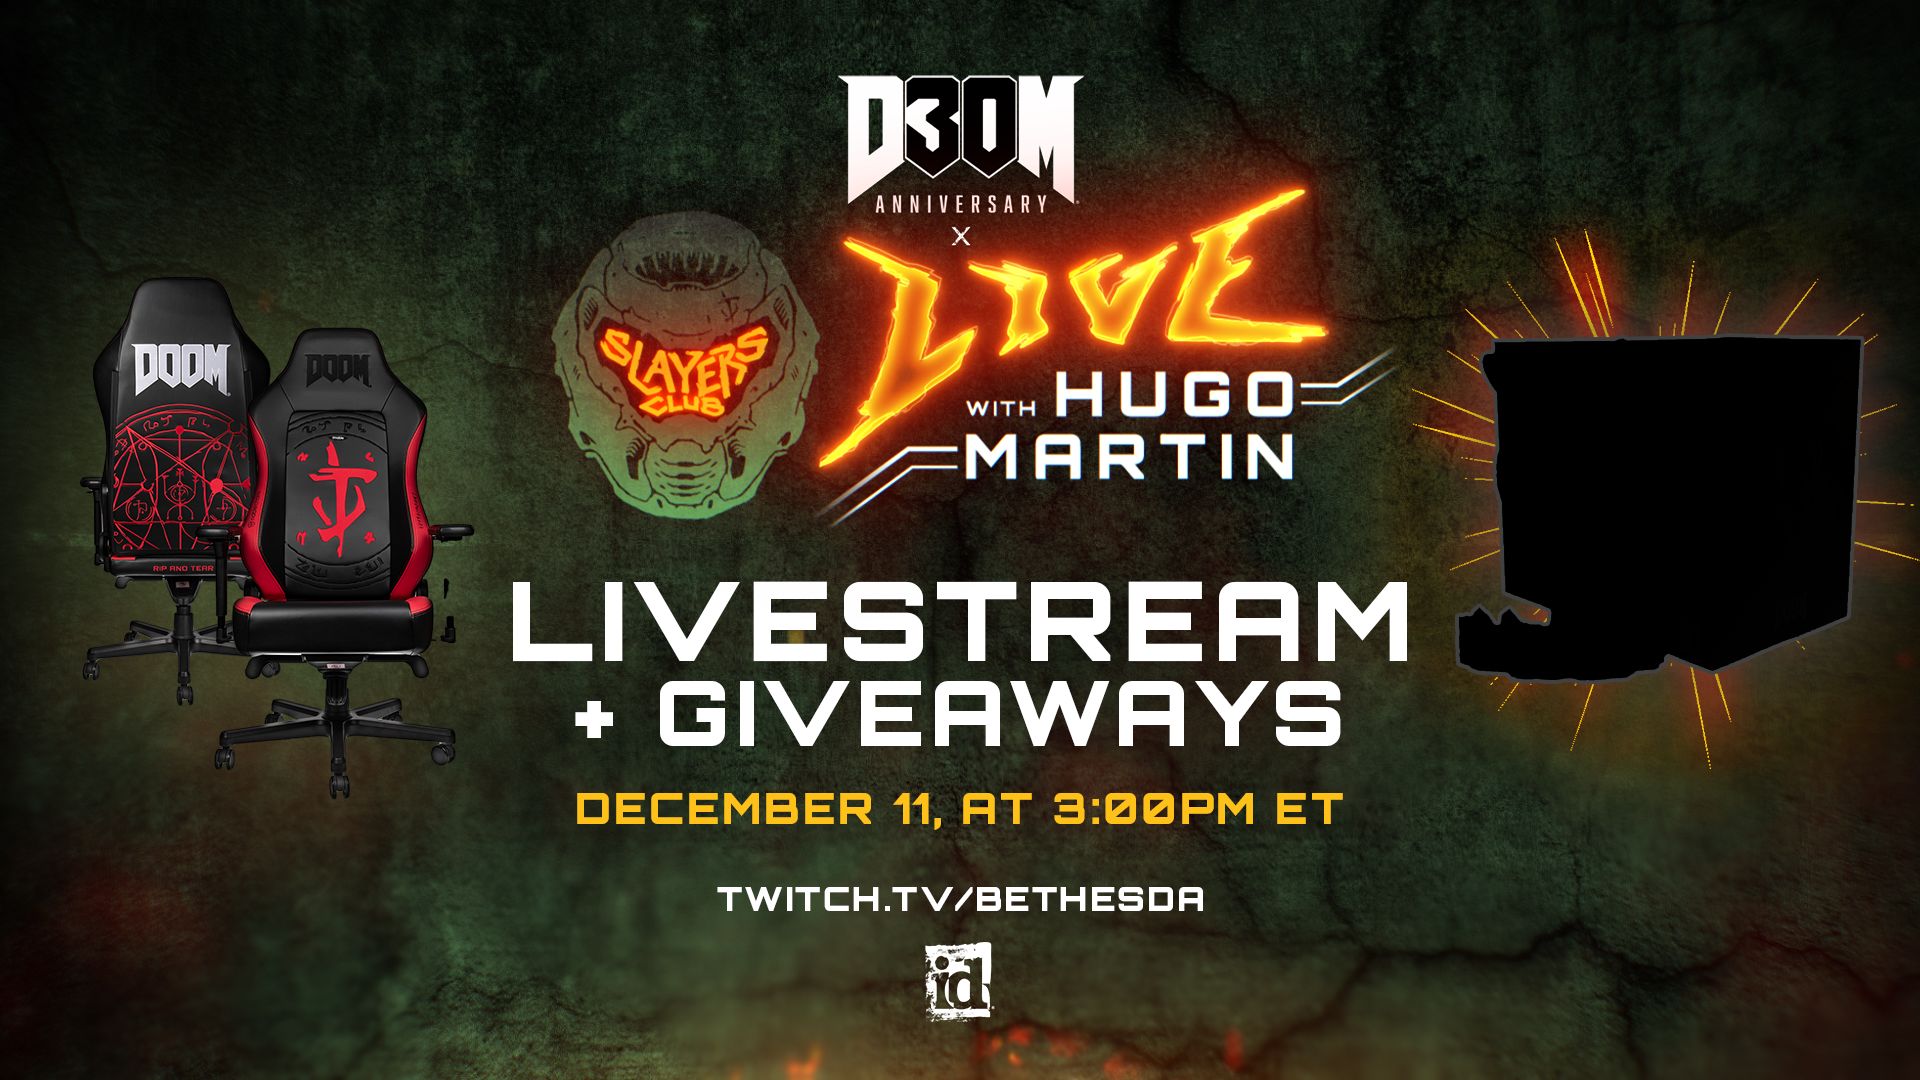 Tune into the DOOM 30th Anniversary stream December 11 at 3:00pm ET on twitch.tv/bethesda